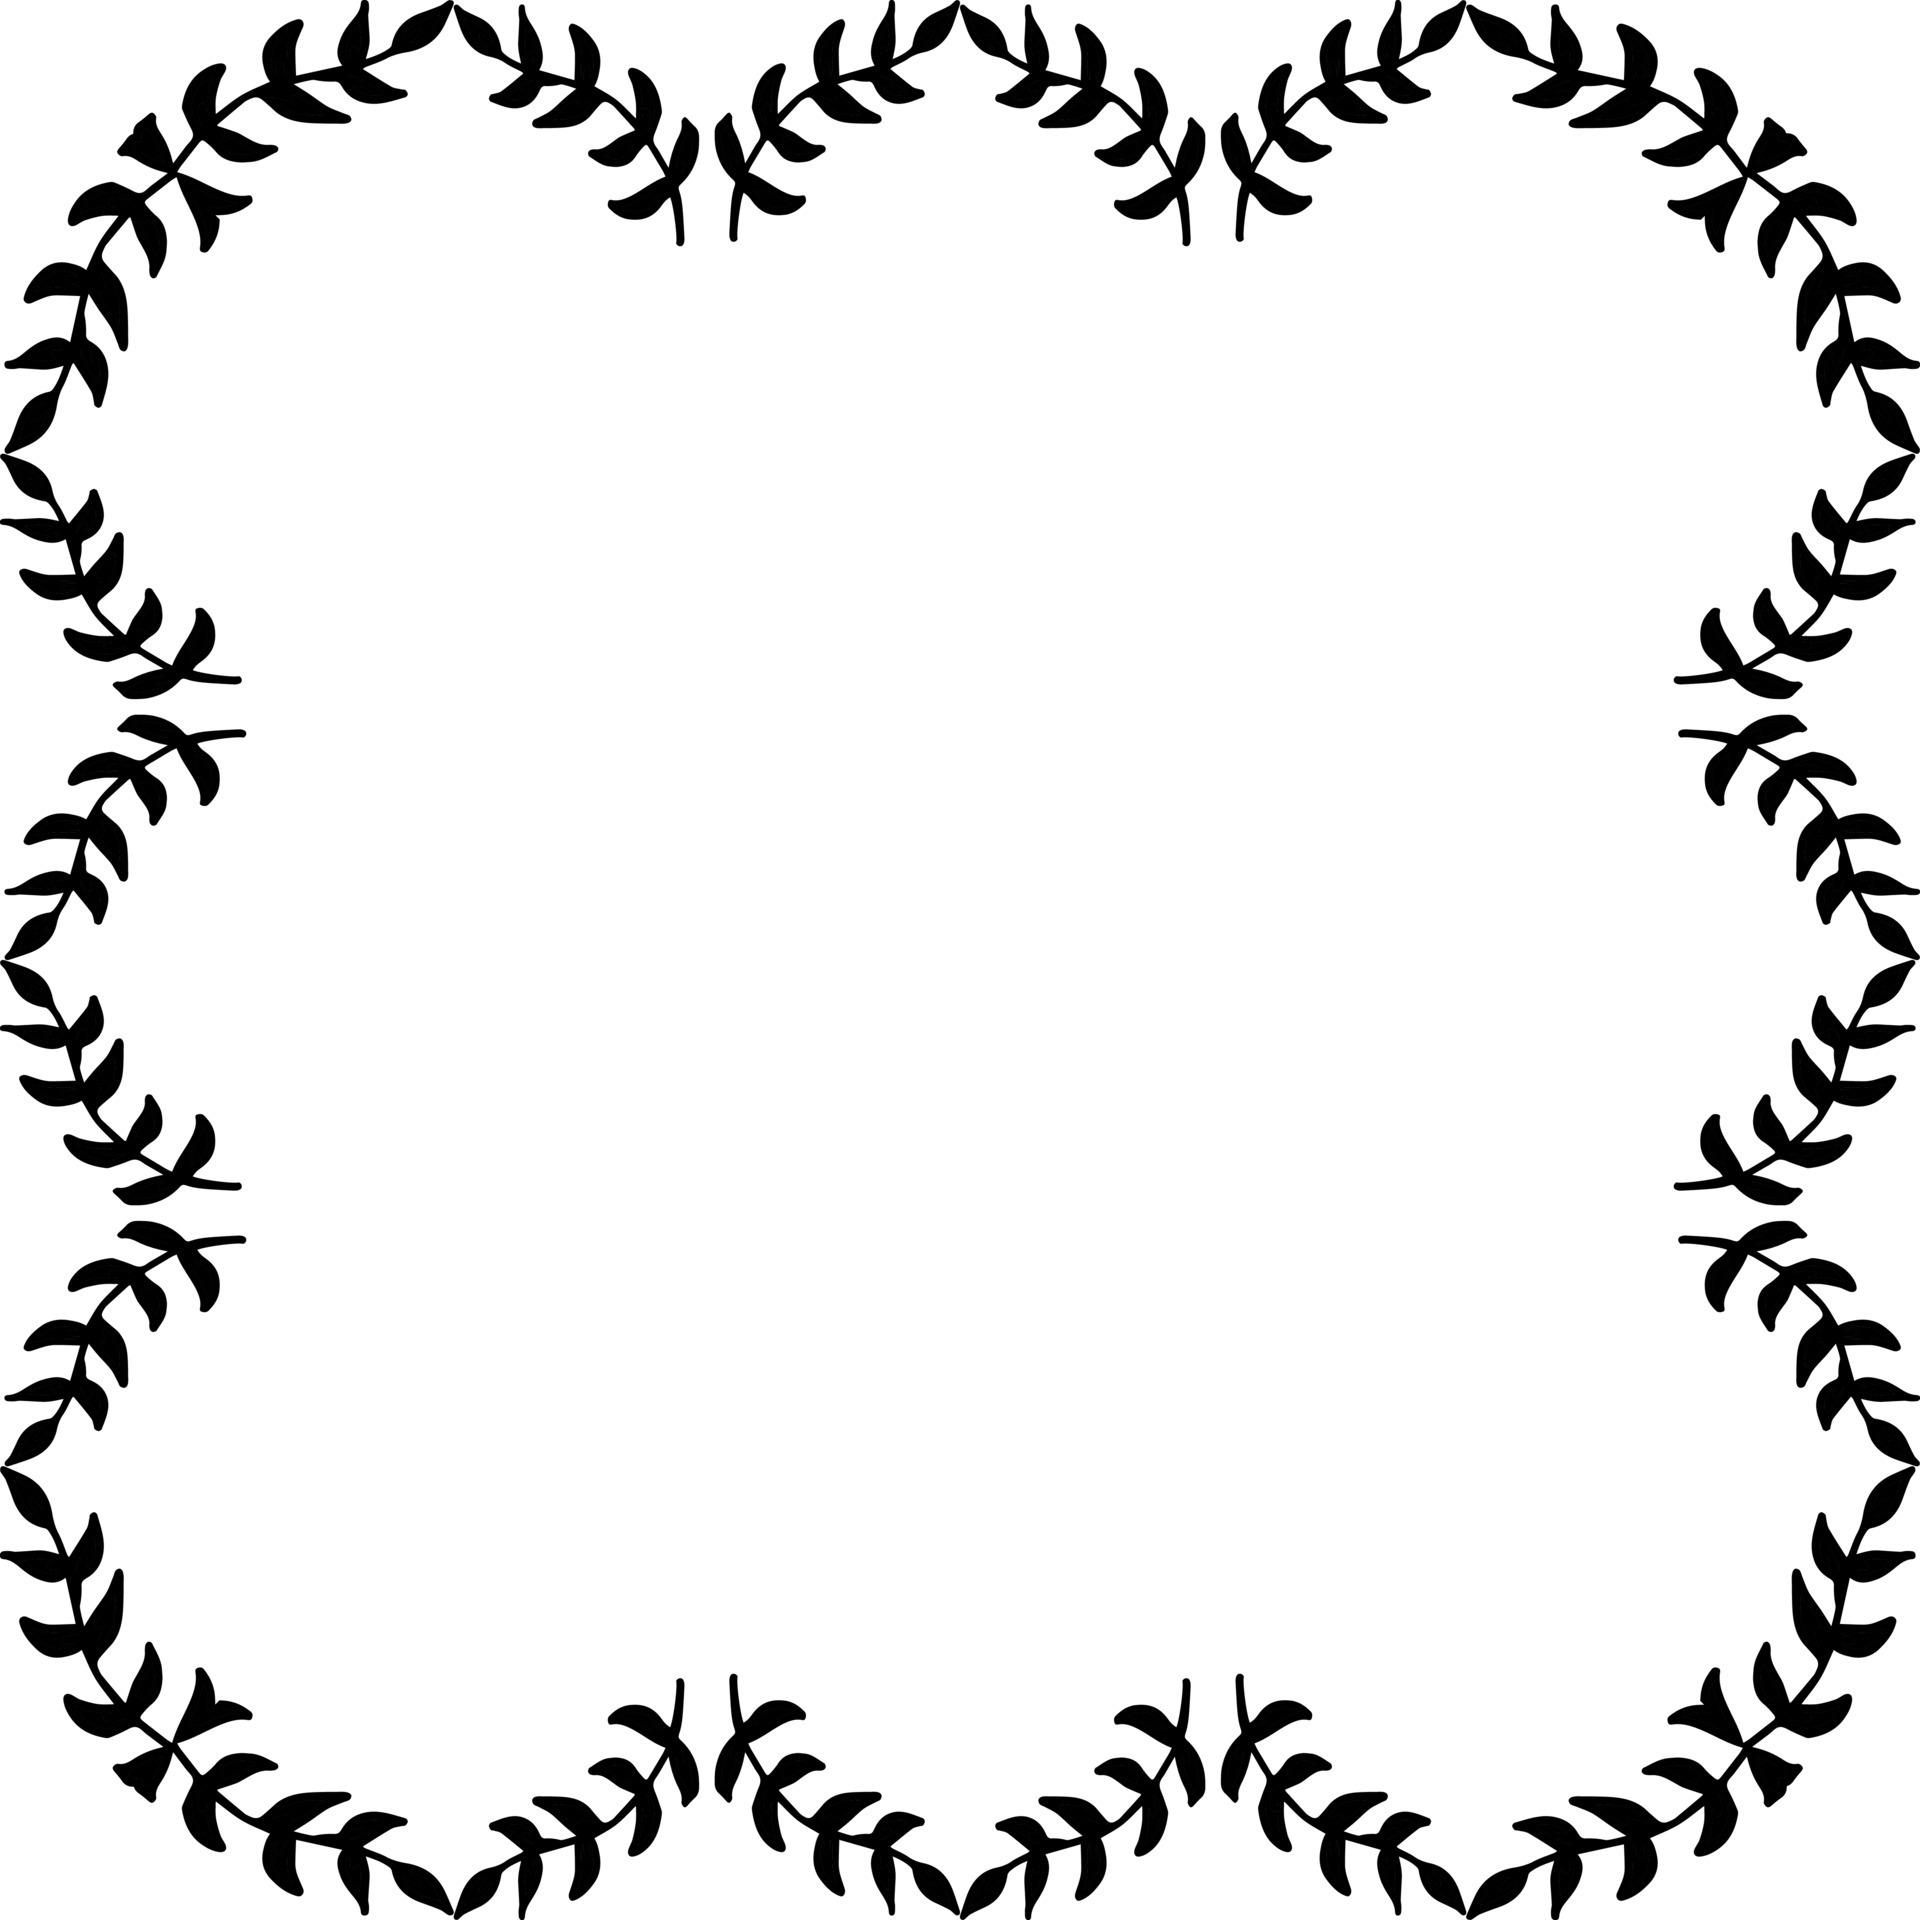 Square frame of decorative black branches on white background. Isolated ...